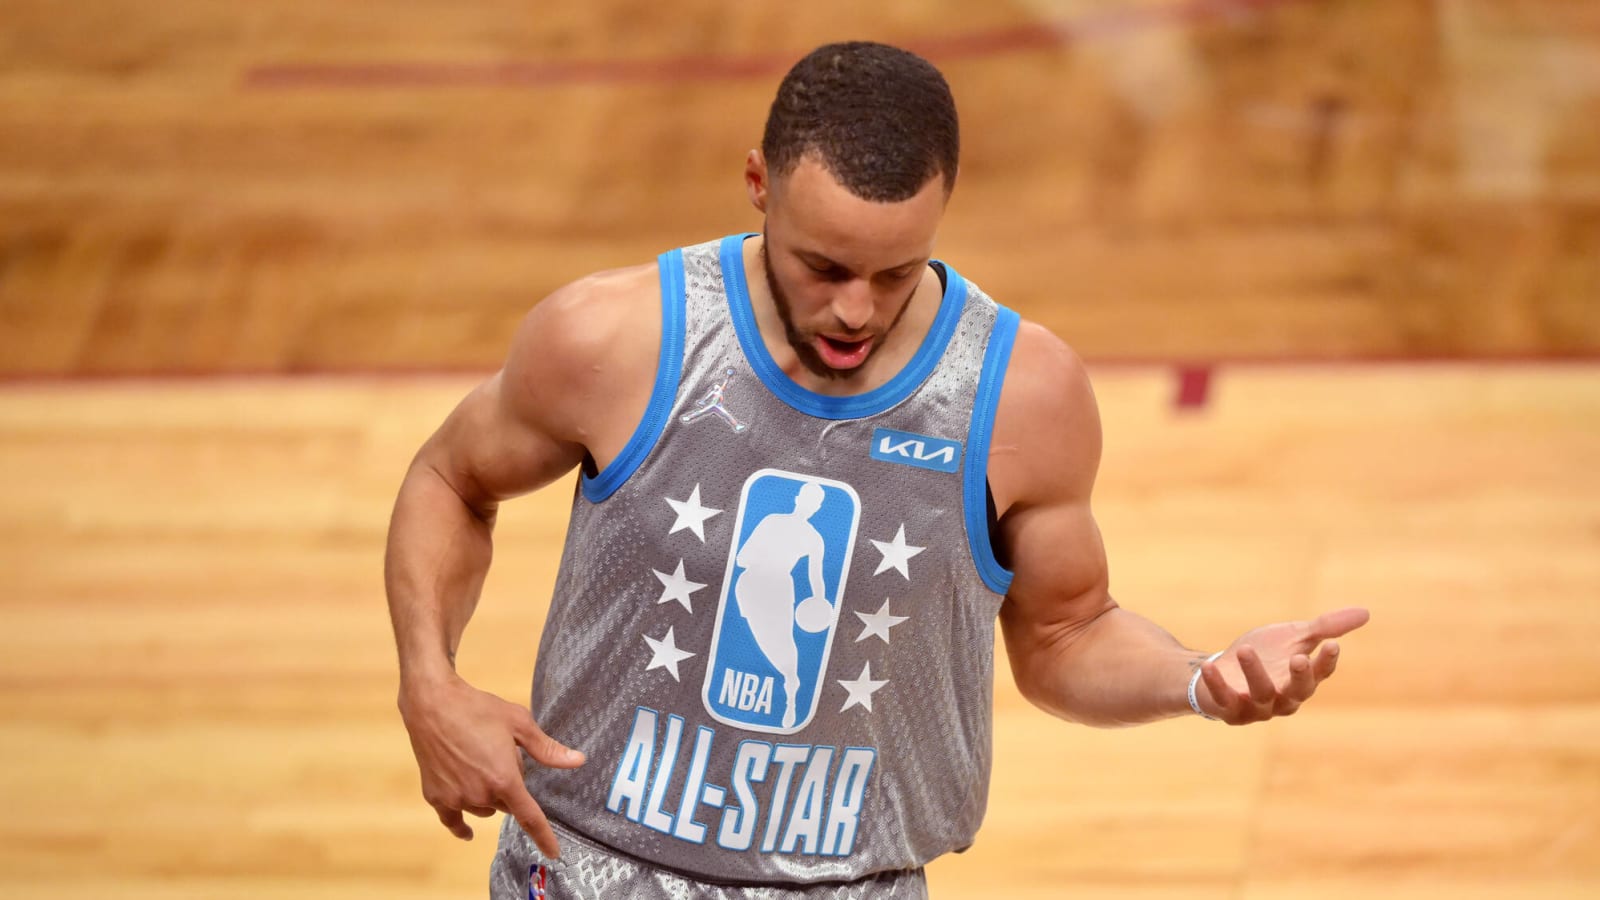 Twitter reacts to Stephen Curry’s record-breaking NBA All-Star Game performance